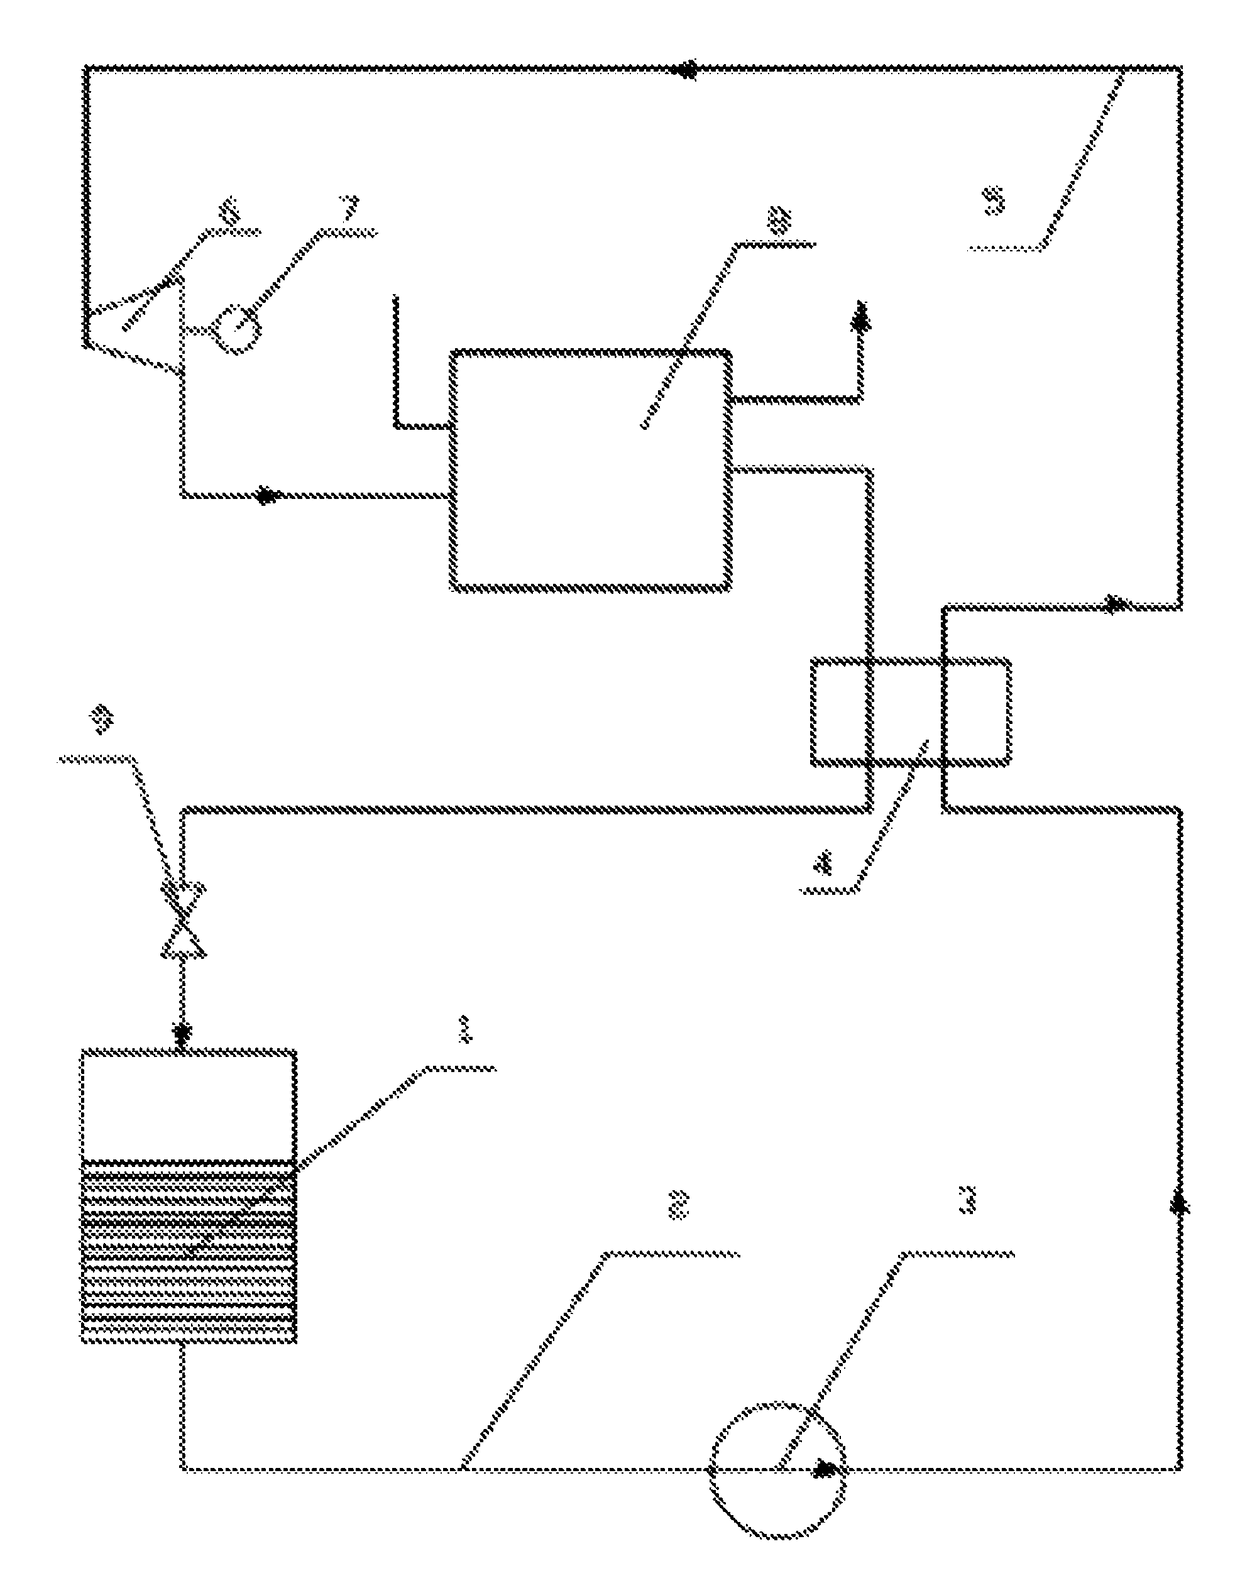 Cold dynamic cycle refrigeration apparatus